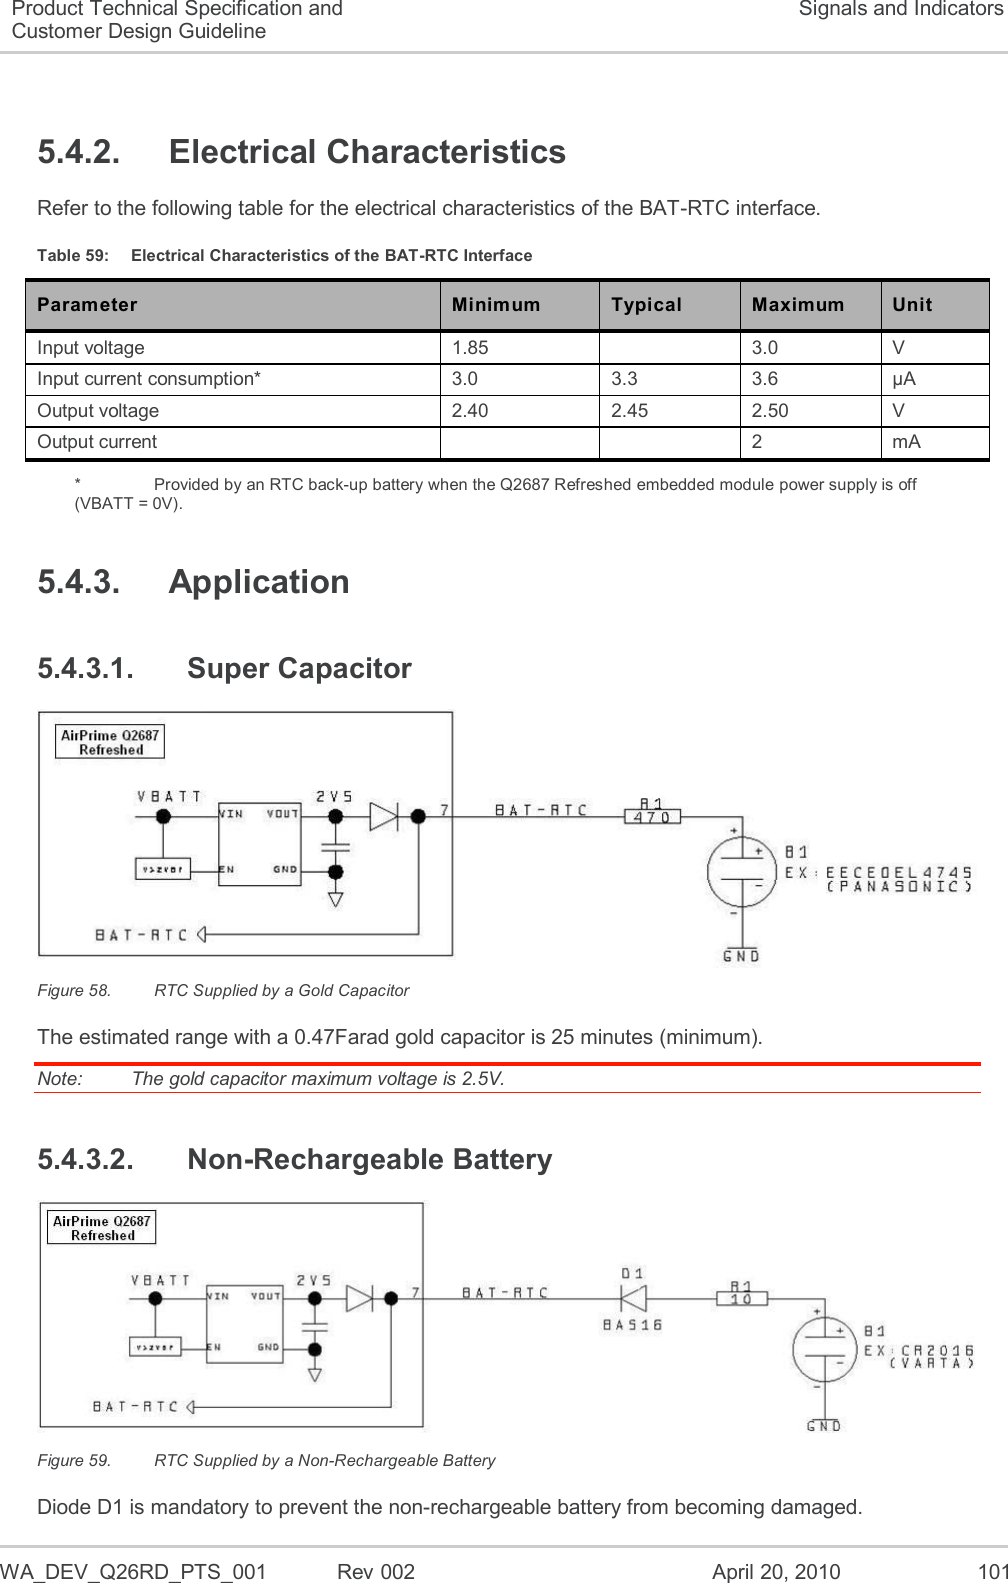   WA_DEV_Q26RD_PTS_001  Rev 002  April 20, 2010 101 Product Technical Specification and Customer Design Guideline Signals and Indicators 5.4.2.  Electrical Characteristics Refer to the following table for the electrical characteristics of the BAT-RTC interface. Table 59:  Electrical Characteristics of the BAT-RTC Interface Parameter Minimum Typical Maximum Unit Input voltage 1.85  3.0 V Input current consumption*  3.0  3.3 3.6 µA Output voltage 2.40 2.45 2.50 V Output current   2 mA *    Provided by an RTC back-up battery when the Q2687 Refreshed embedded module power supply is off (VBATT = 0V). 5.4.3.  Application 5.4.3.1.  Super Capacitor  Figure 58.  RTC Supplied by a Gold Capacitor The estimated range with a 0.47Farad gold capacitor is 25 minutes (minimum). Note:   The gold capacitor maximum voltage is 2.5V. 5.4.3.2.  Non-Rechargeable Battery  Figure 59.  RTC Supplied by a Non-Rechargeable Battery Diode D1 is mandatory to prevent the non-rechargeable battery from becoming damaged. 